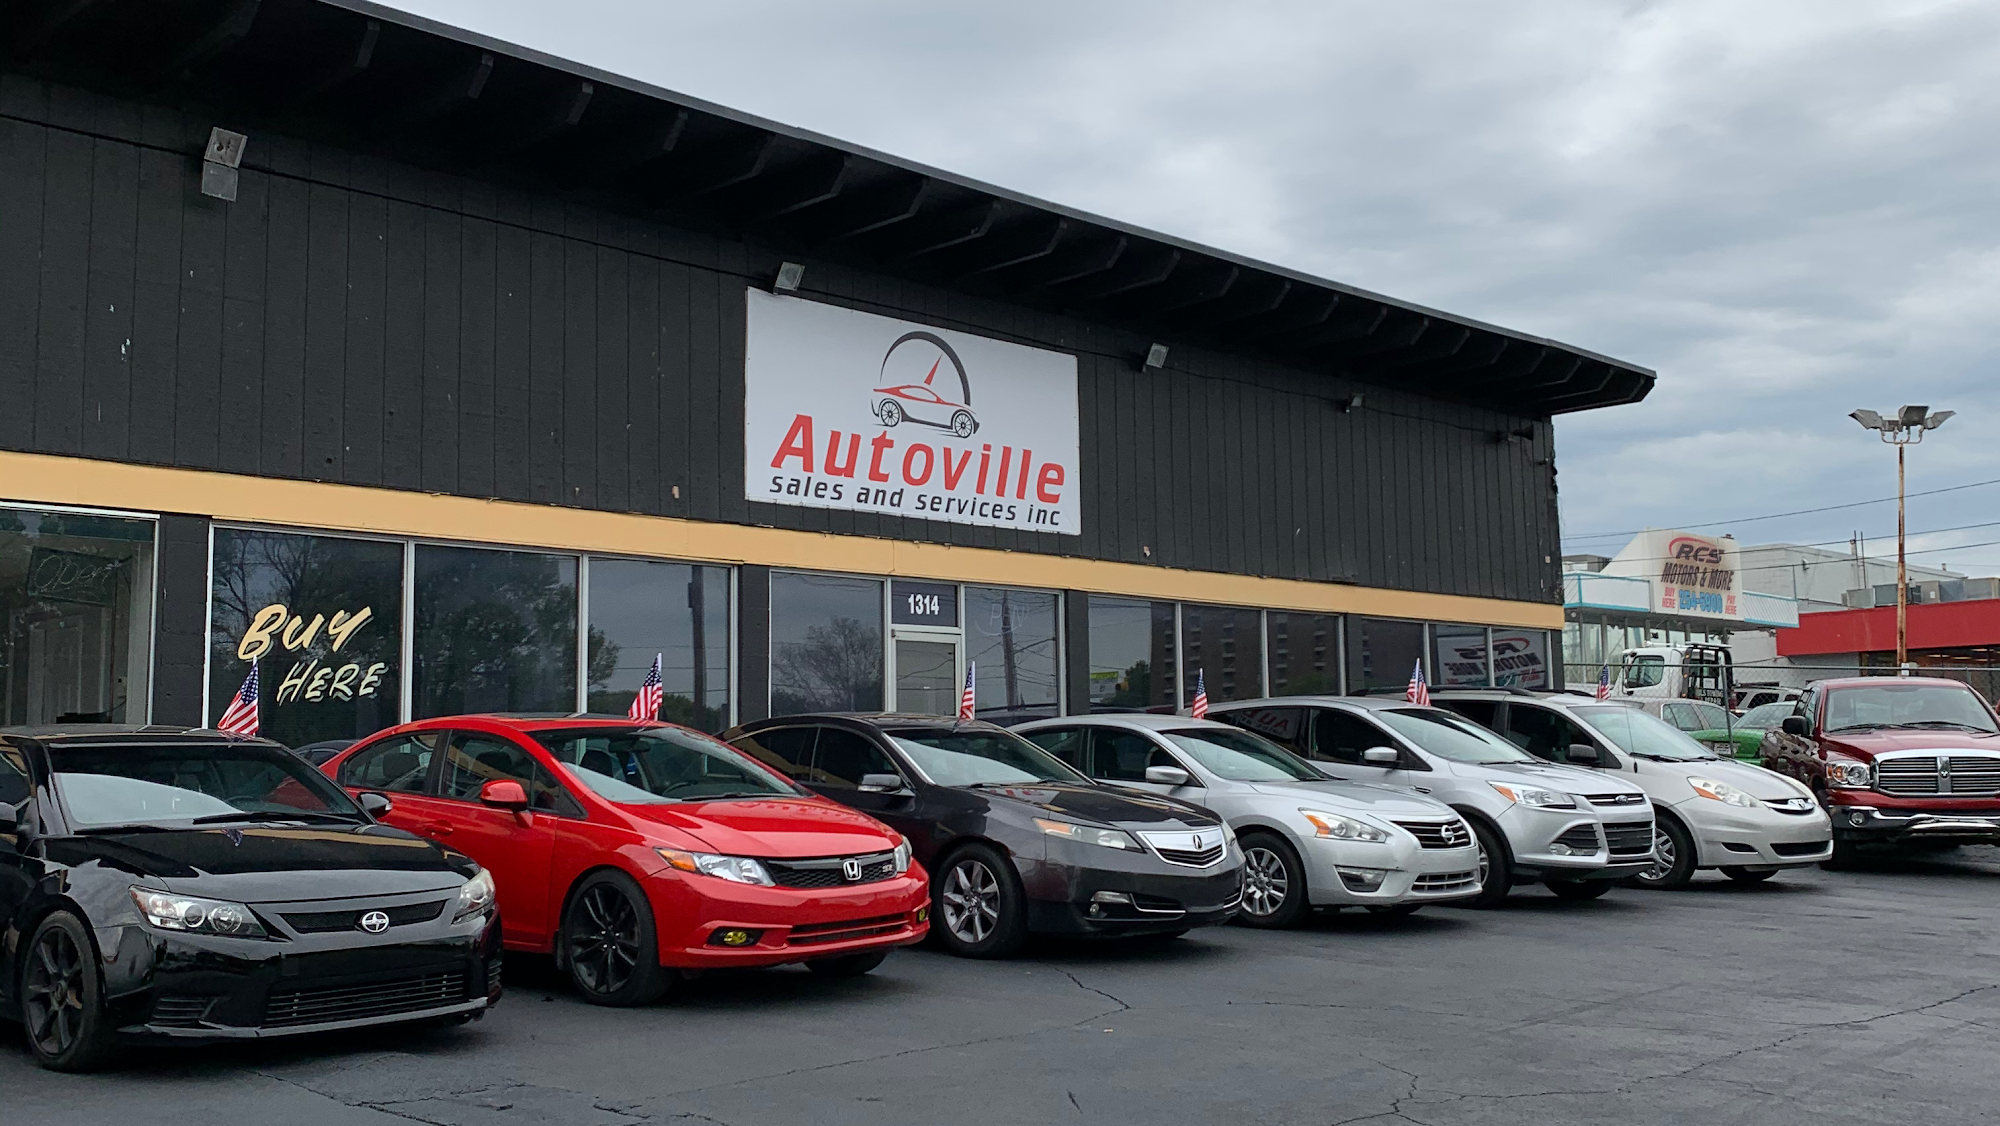 Autoville Sales and Services Inc 1314 Gallatin Pike S, Madison